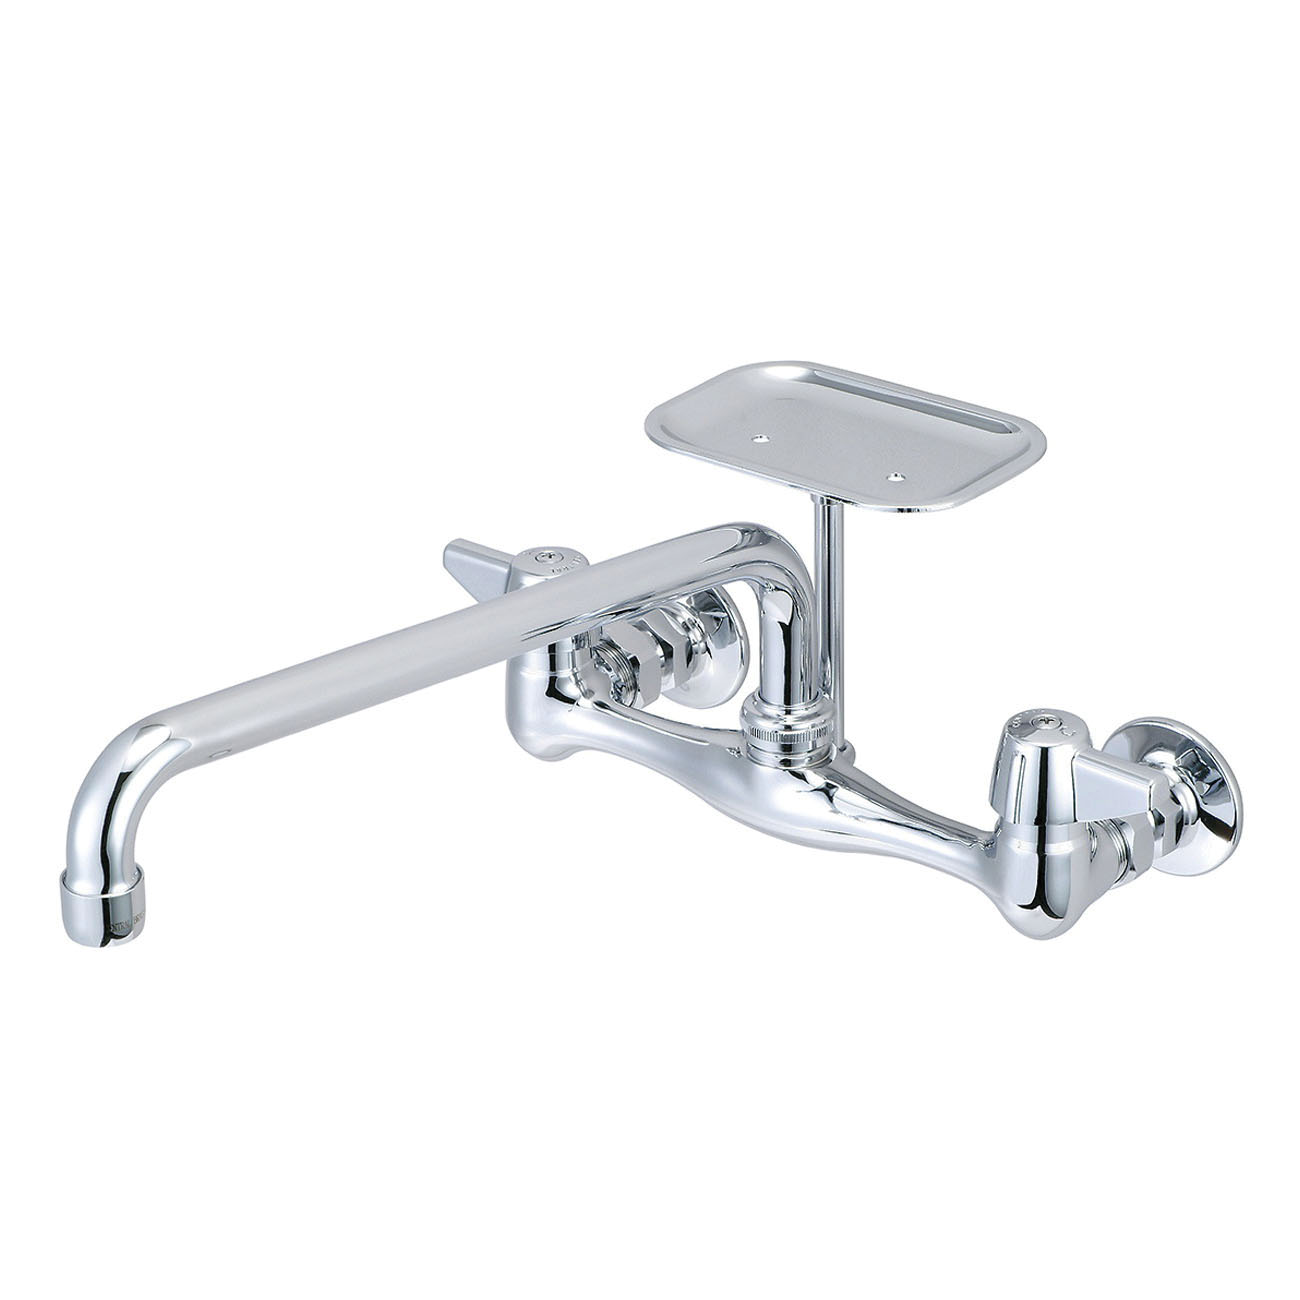 Central Brass 0048-UA3 Kitchen Faucet, 1.5 gpm Flow Rate, 7-7/8 to 8-1/8 in Center, Swivel Tubular Spout, Polished Chrome, 2 Handles